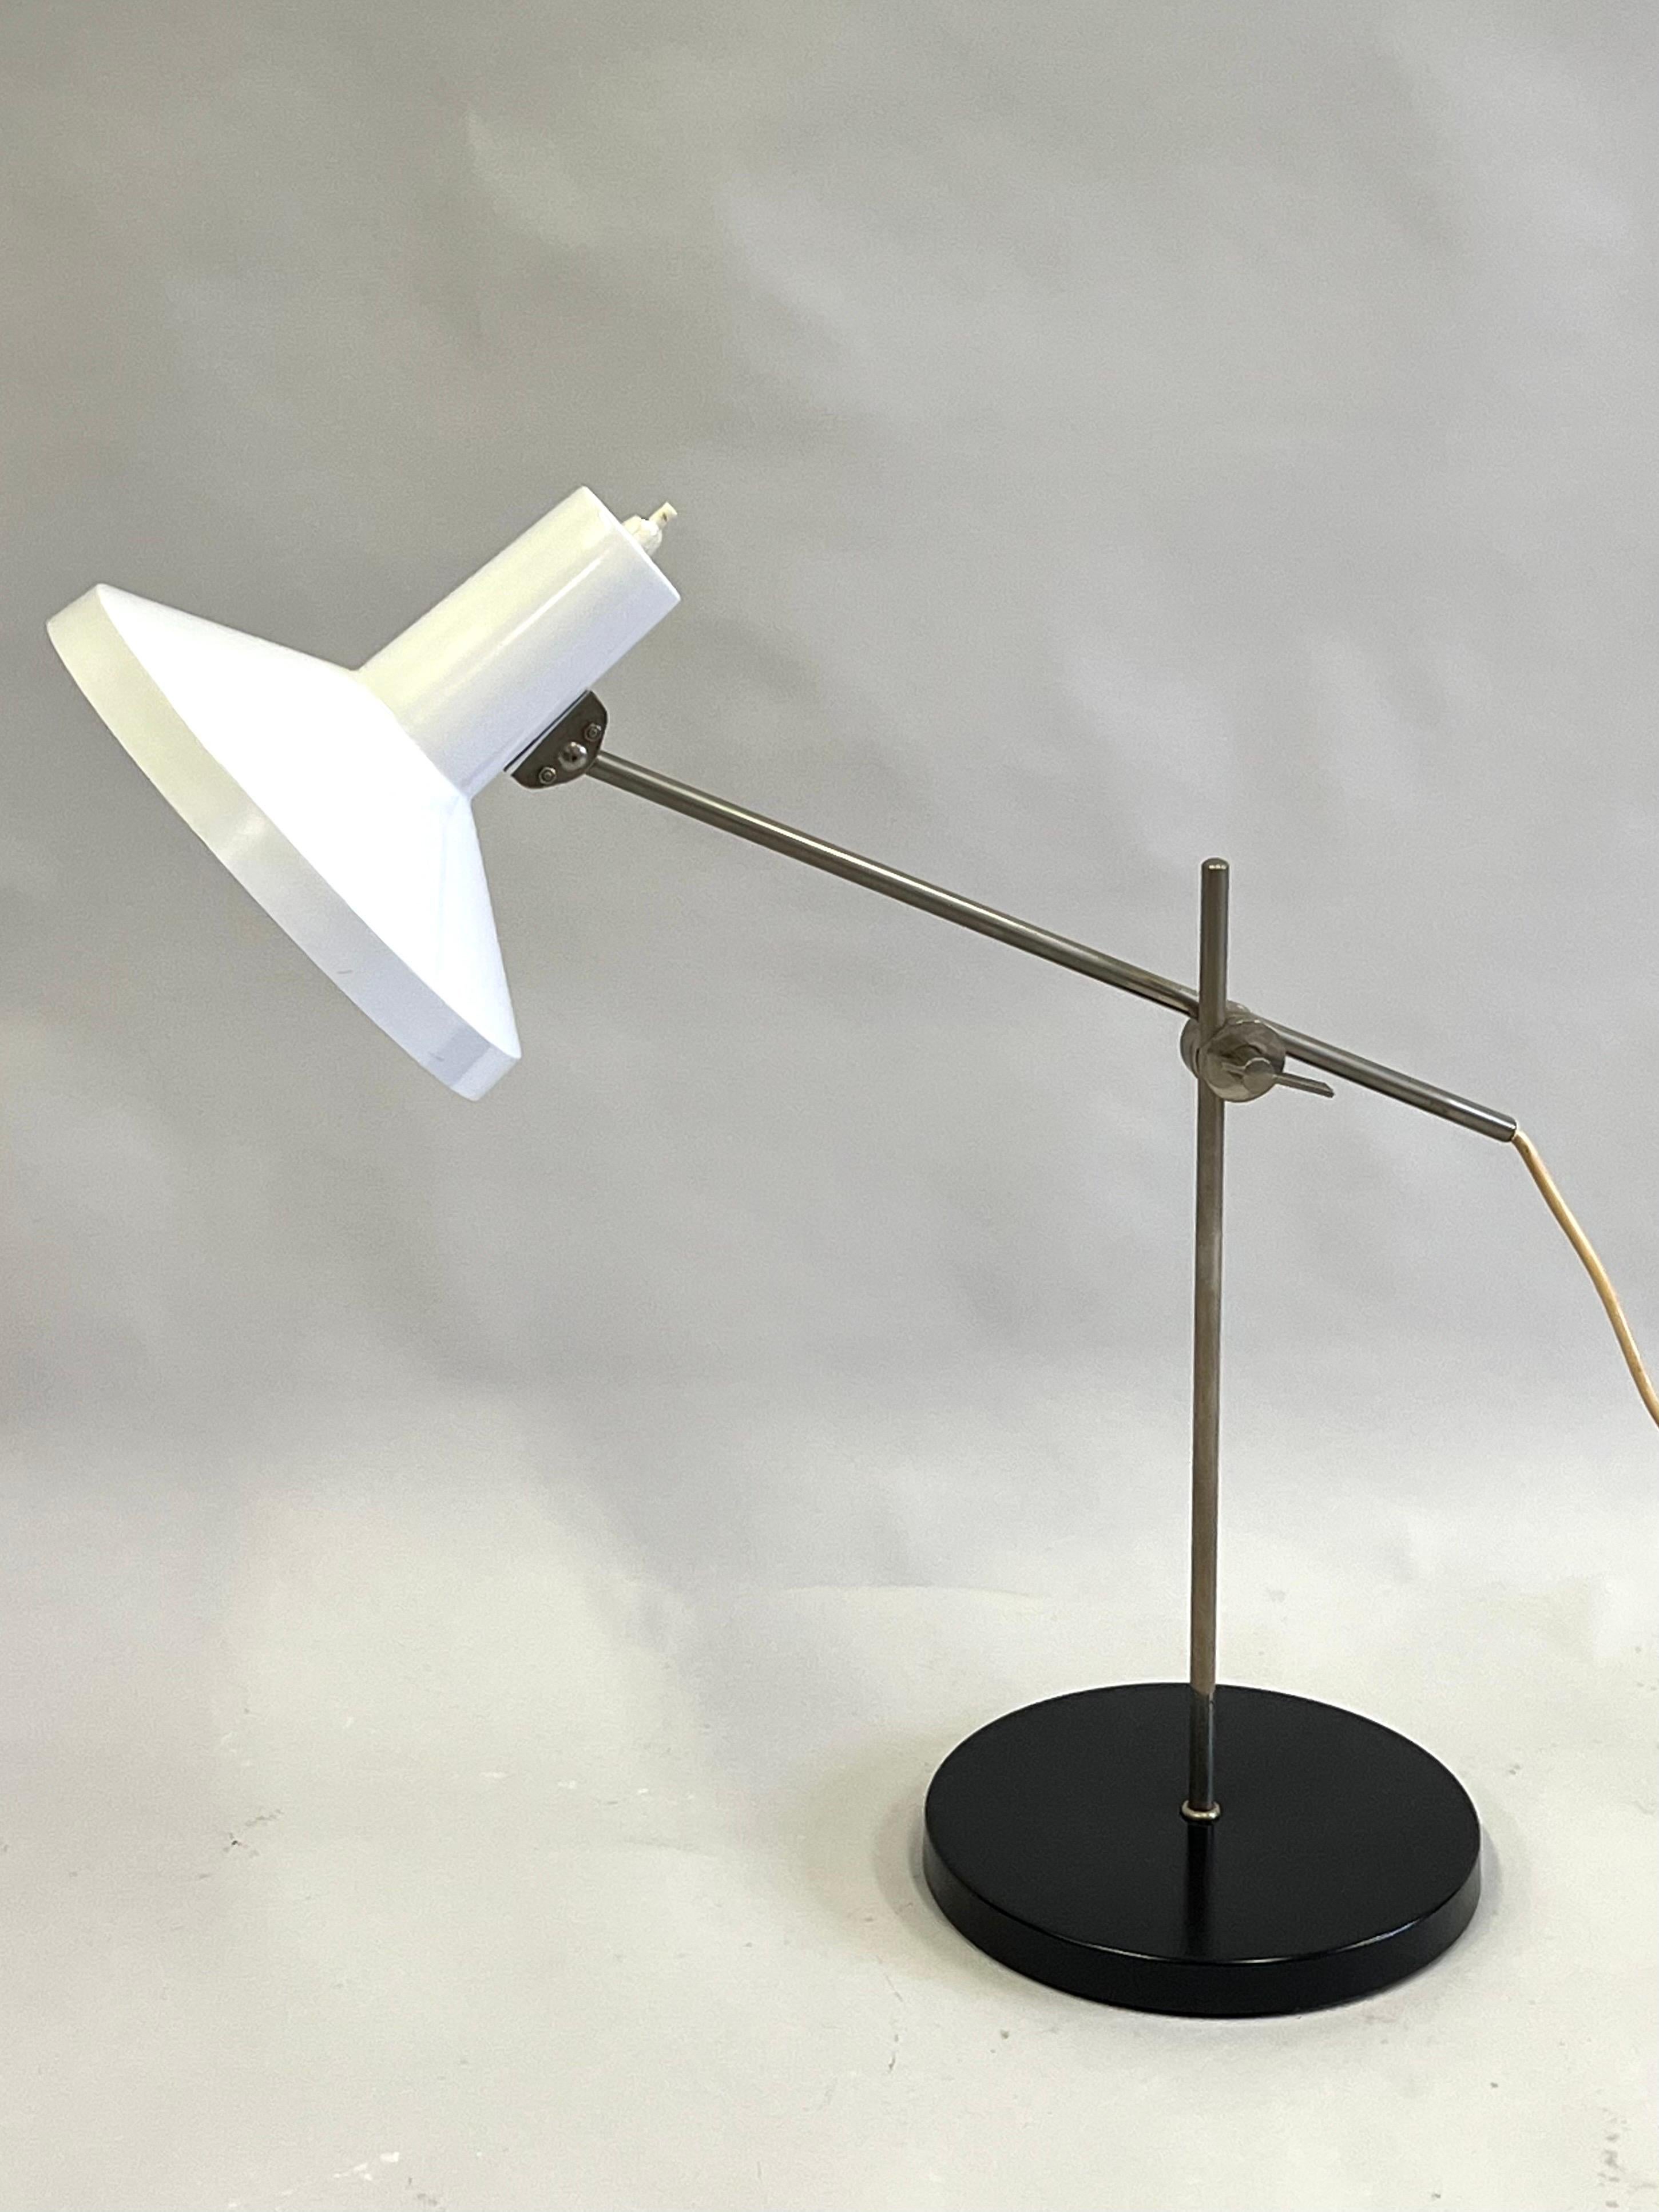 Mid-20th Century Italian Mid-Century Modern Cantilevered Table / Desk Lamp, Attr. to Arredoluce For Sale